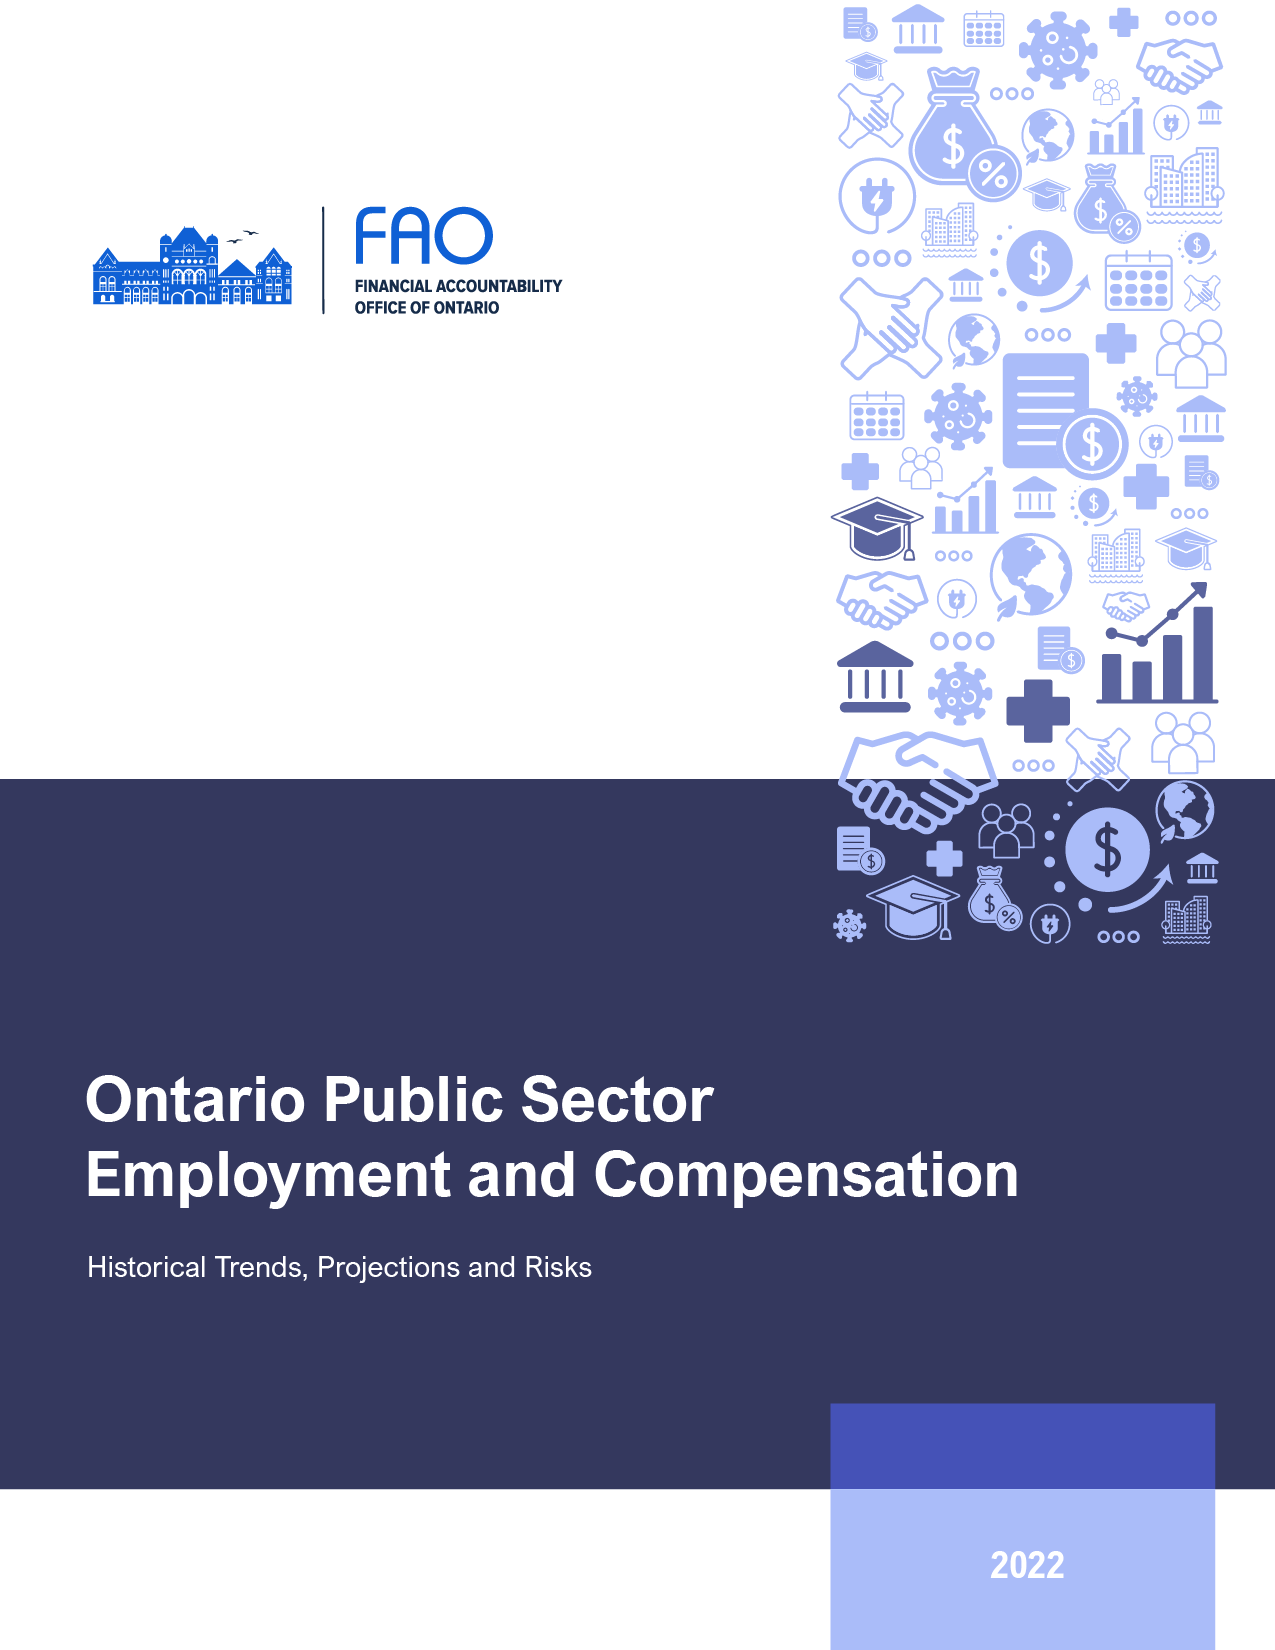 Ontario Public Sector Employment and Compensation report cover